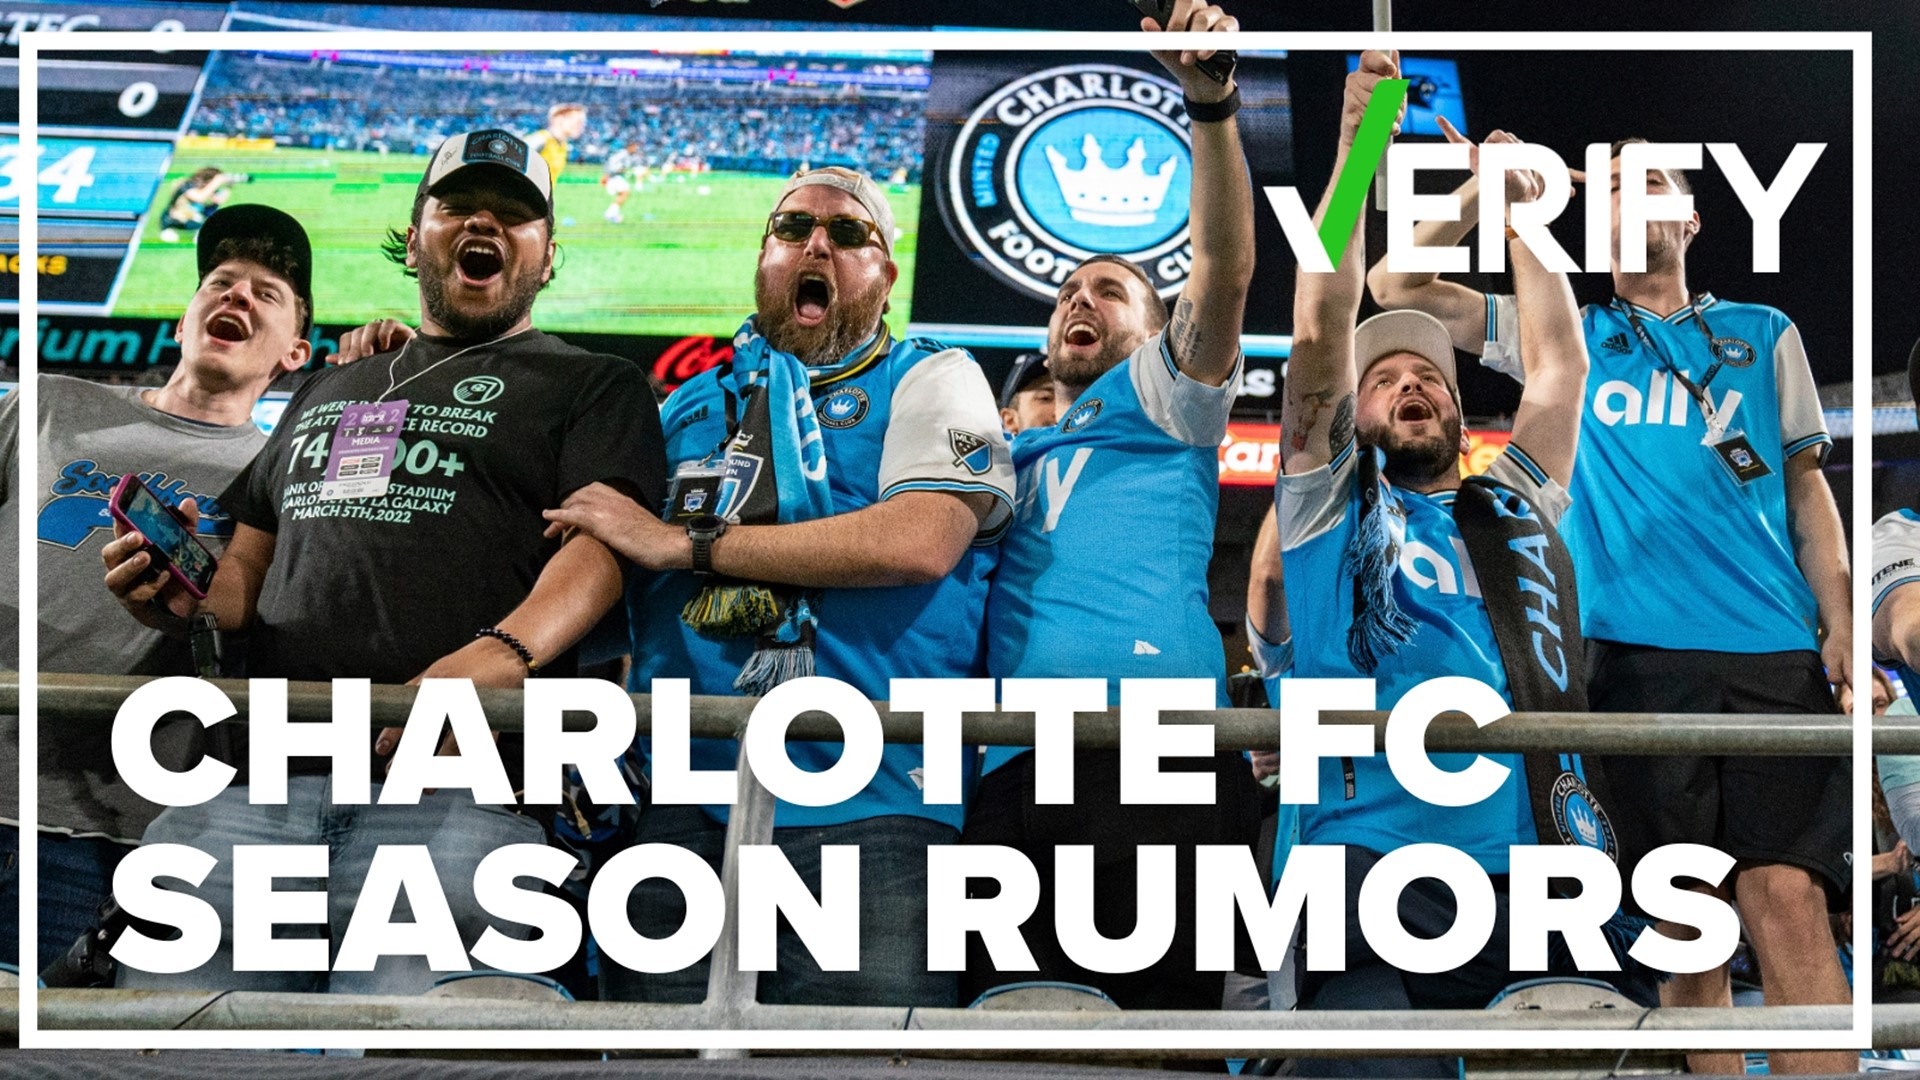 Right now, 60,000 people are set to cheer on Charlotte FC Saturday as they take the pitch for their home season opener.